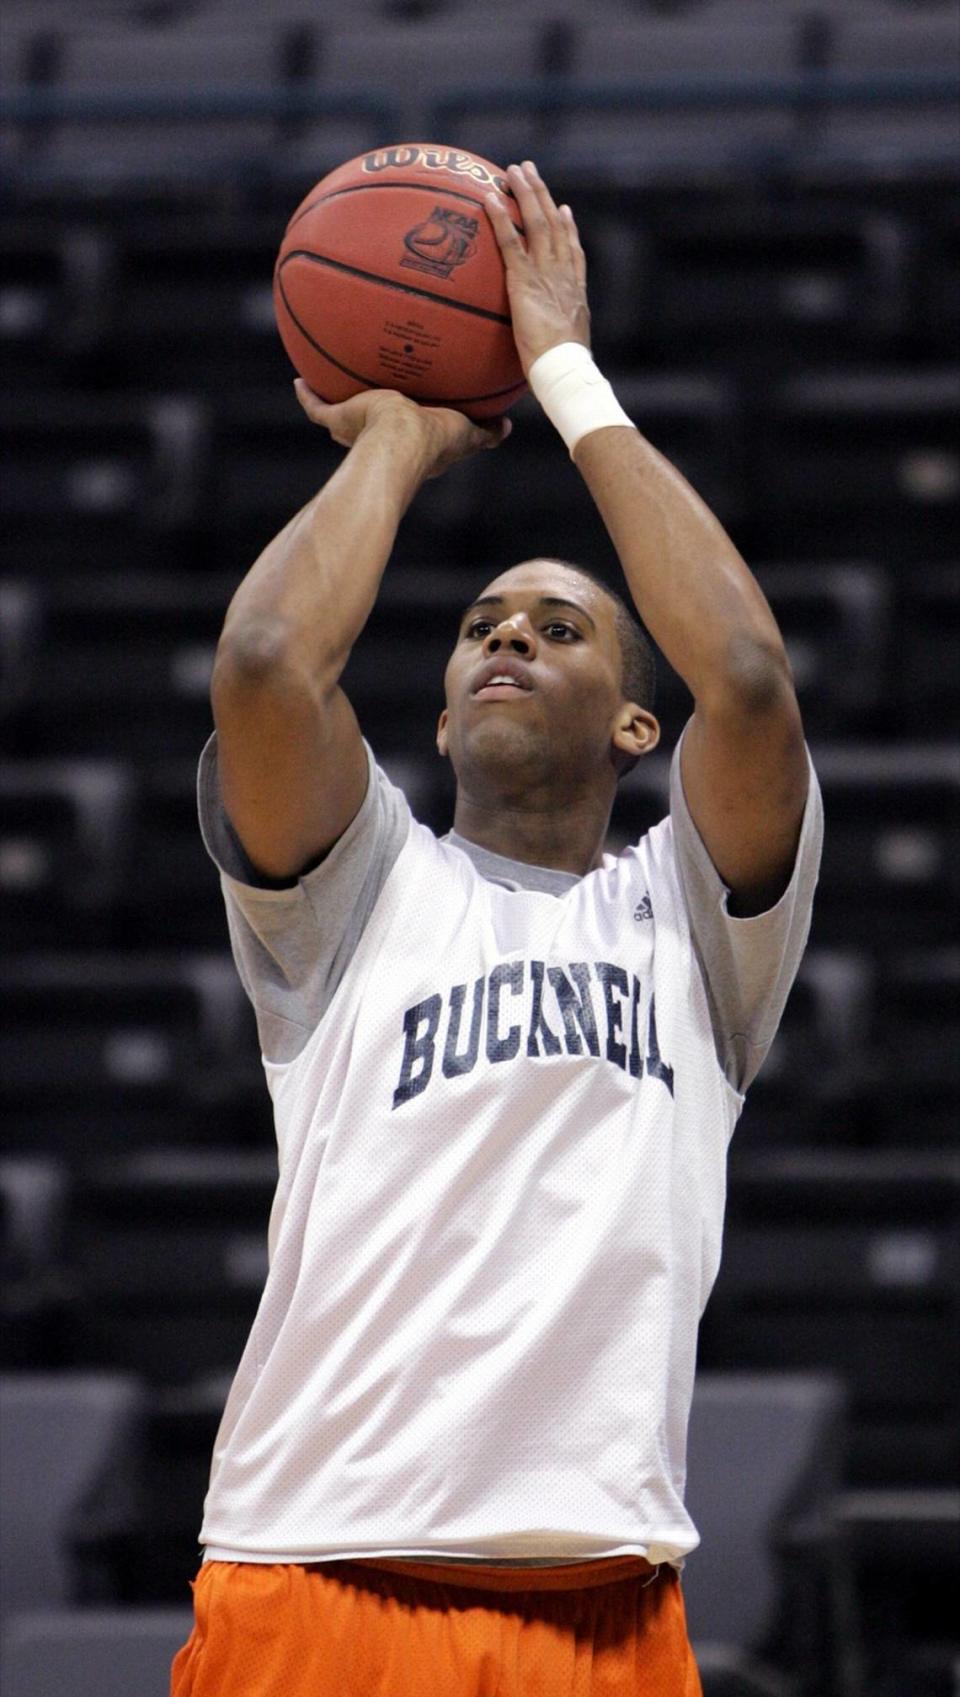 Bucknell guard Charles Lee (3) takes a warmup shot in 2005. In the mid-2000s, Lee was a star for Bucknell and led the team to the only two NCAA Tournament wins it has ever had before beginning his coaching career.